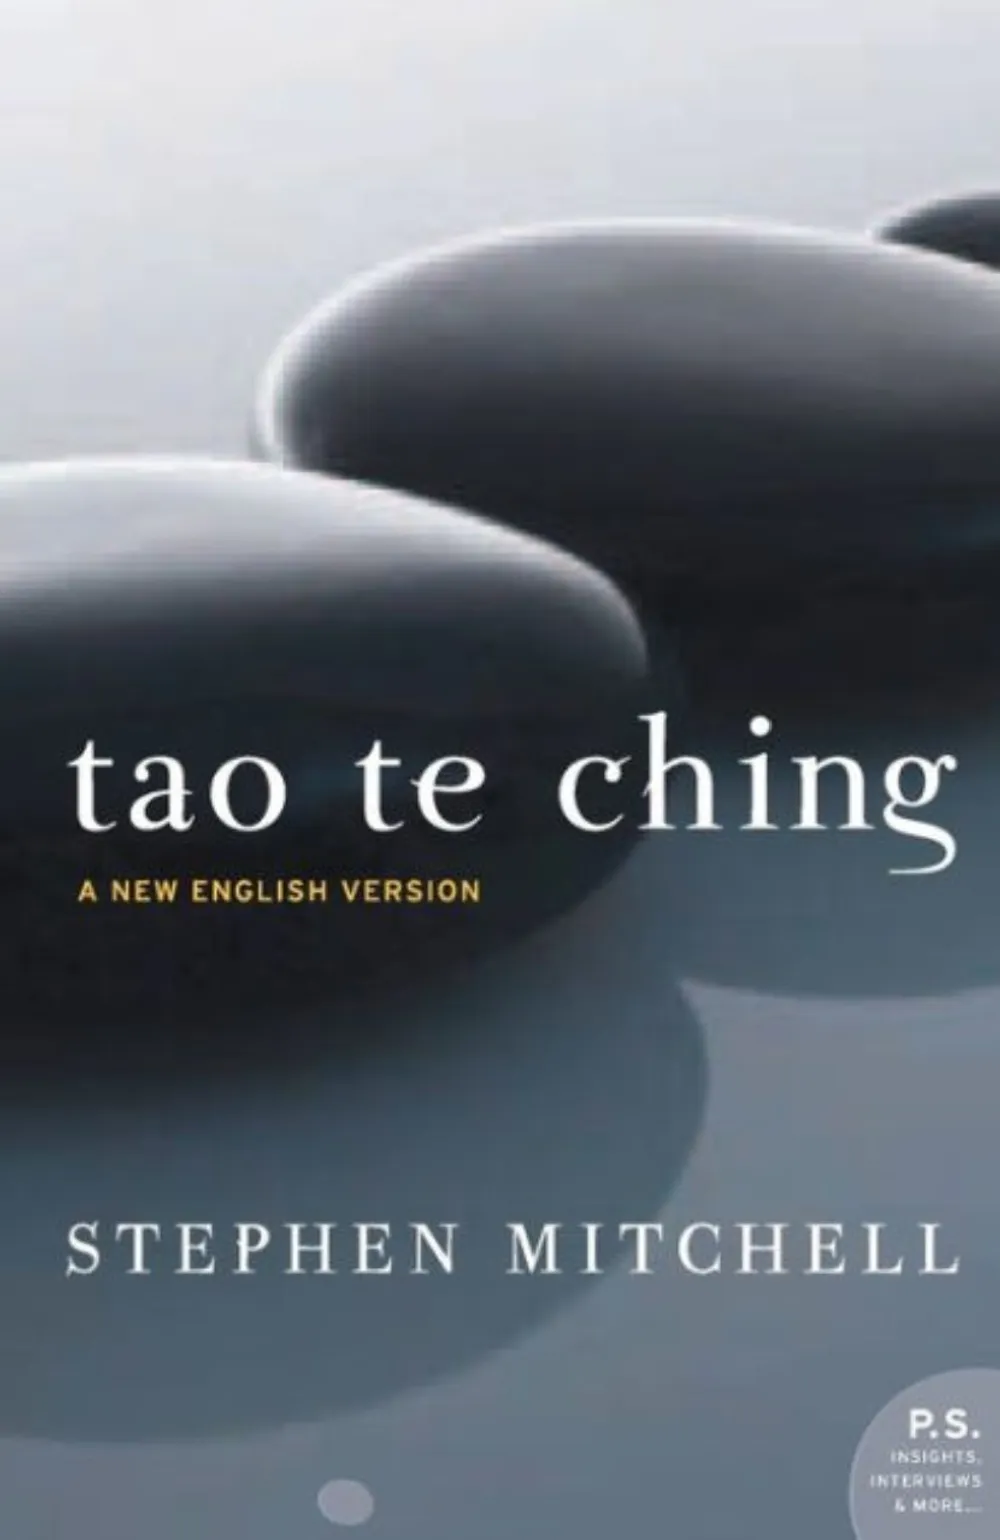 Tao Te Ching, translated by Stephen Mitchell